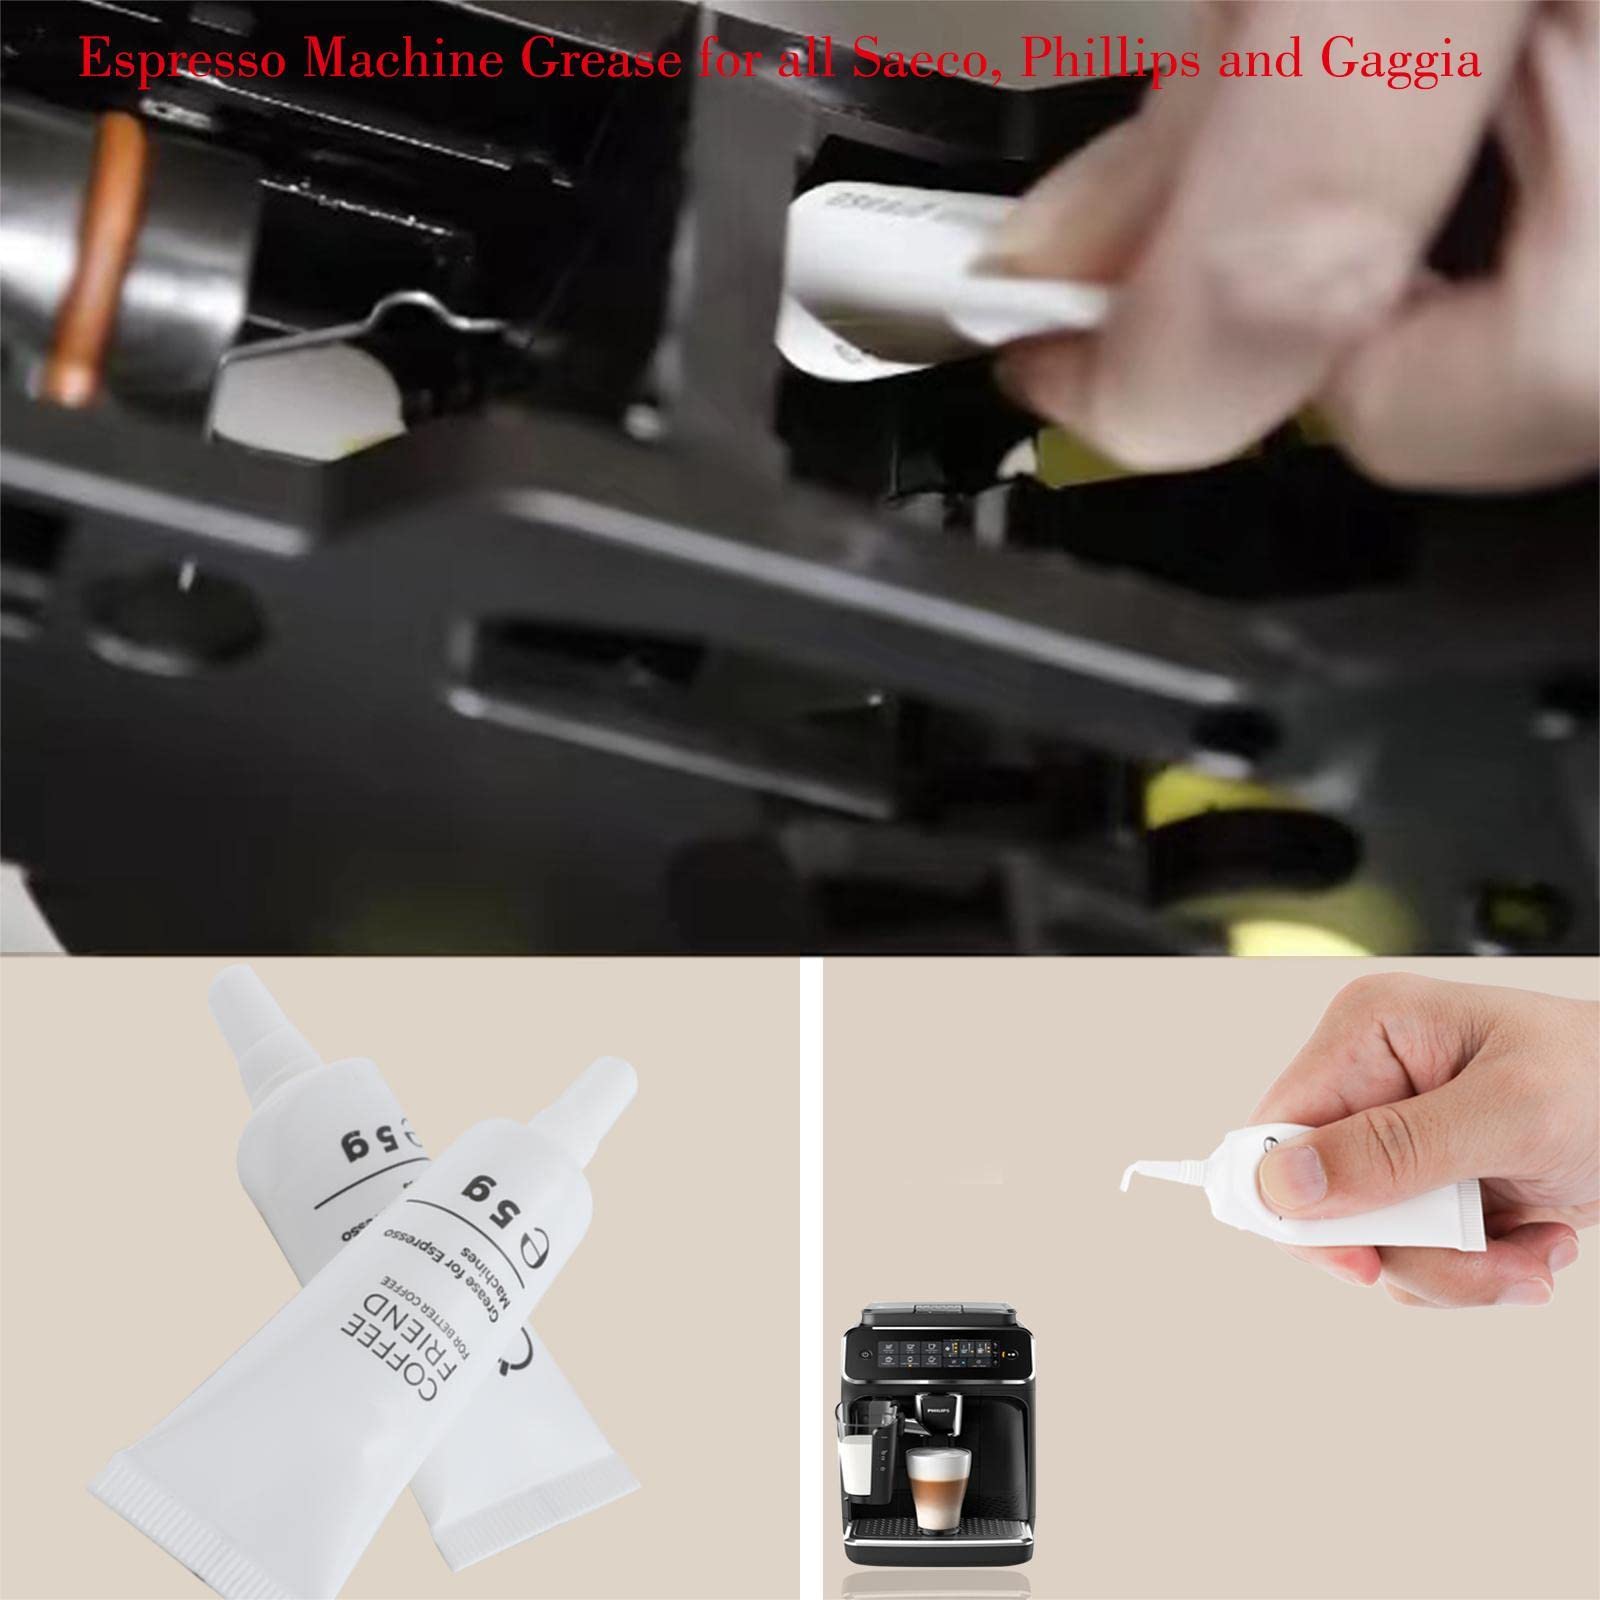 Espresso Machine Grease, Silicone Grease-Coffee machine lubricant 5g Tube fit all Sa eco, Ph illips and Gag gia Expresso Machines, Maintenance Kit for the Care and Maintenance (White2PC)